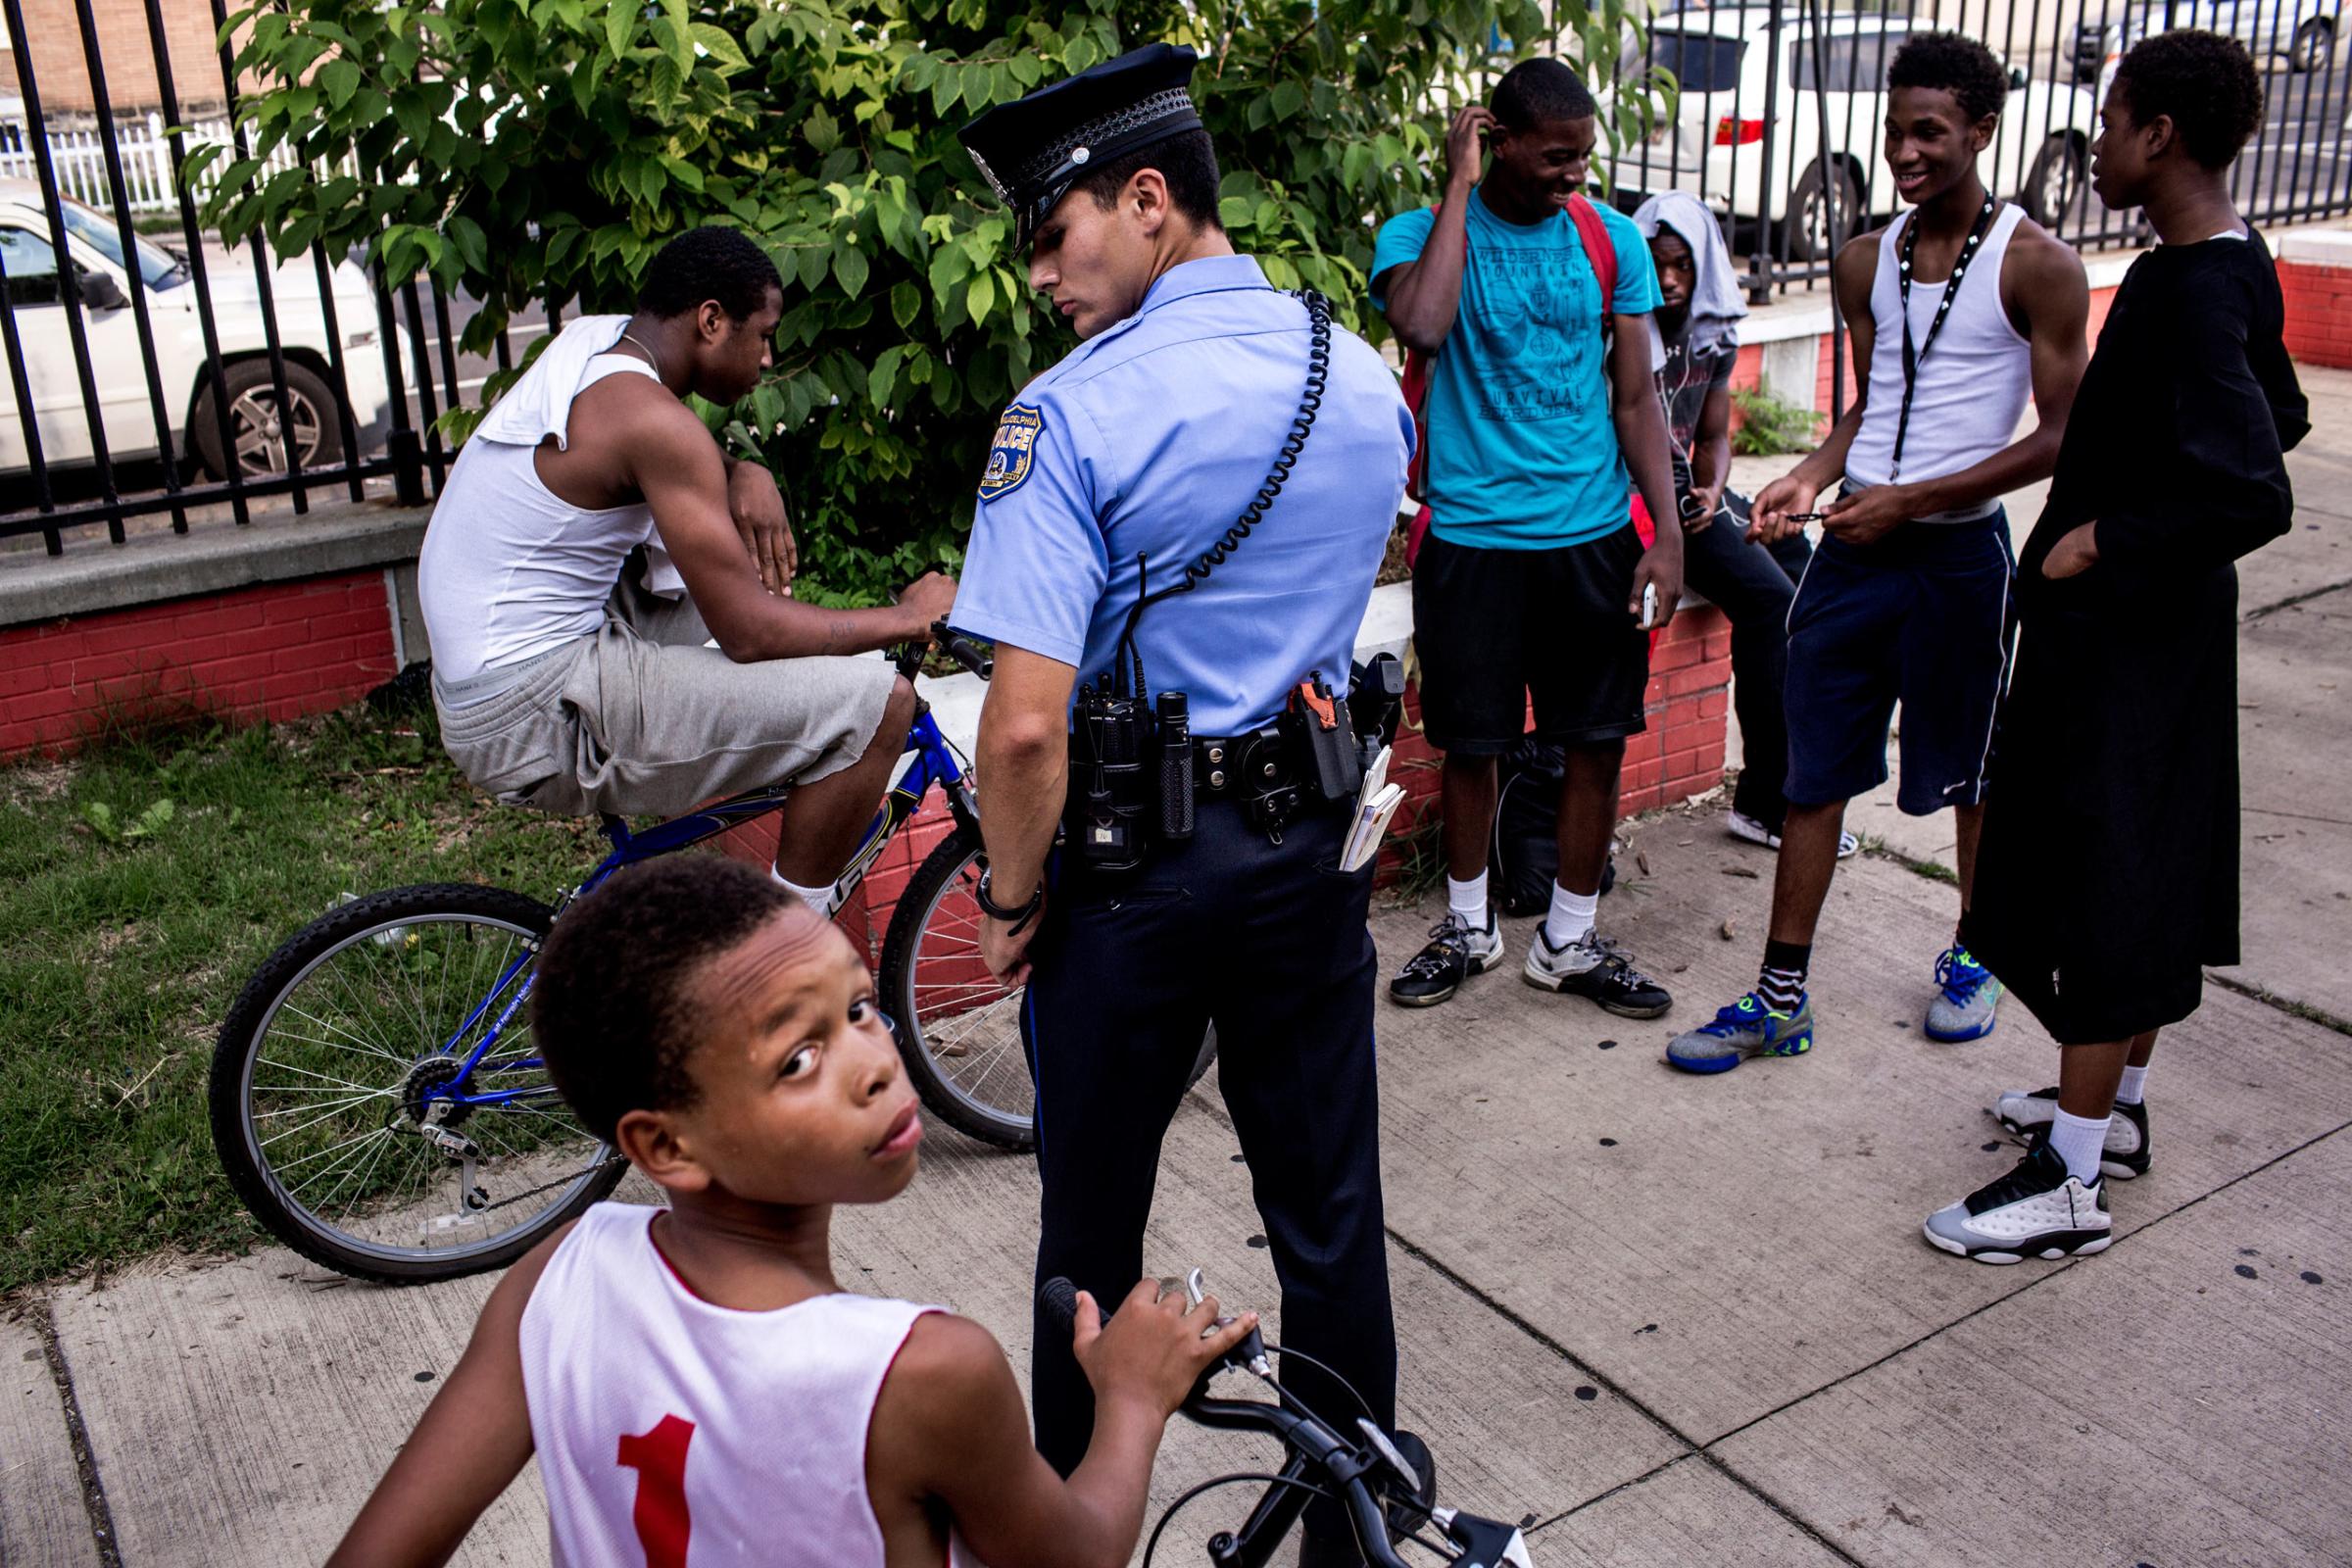 July 28th, 2015. Philadelphia, PA.  First year officer Jonathan Dedos (a "foot beat") questions a group of young men, after a shooting suspect was described as an african american wearing white and on a bike, a description which would imply the majority of young men in the neighborhood. This group, at a local park, was vouched for a by a man who works with local youth, and the police moved on. (Natalie Keyssar)